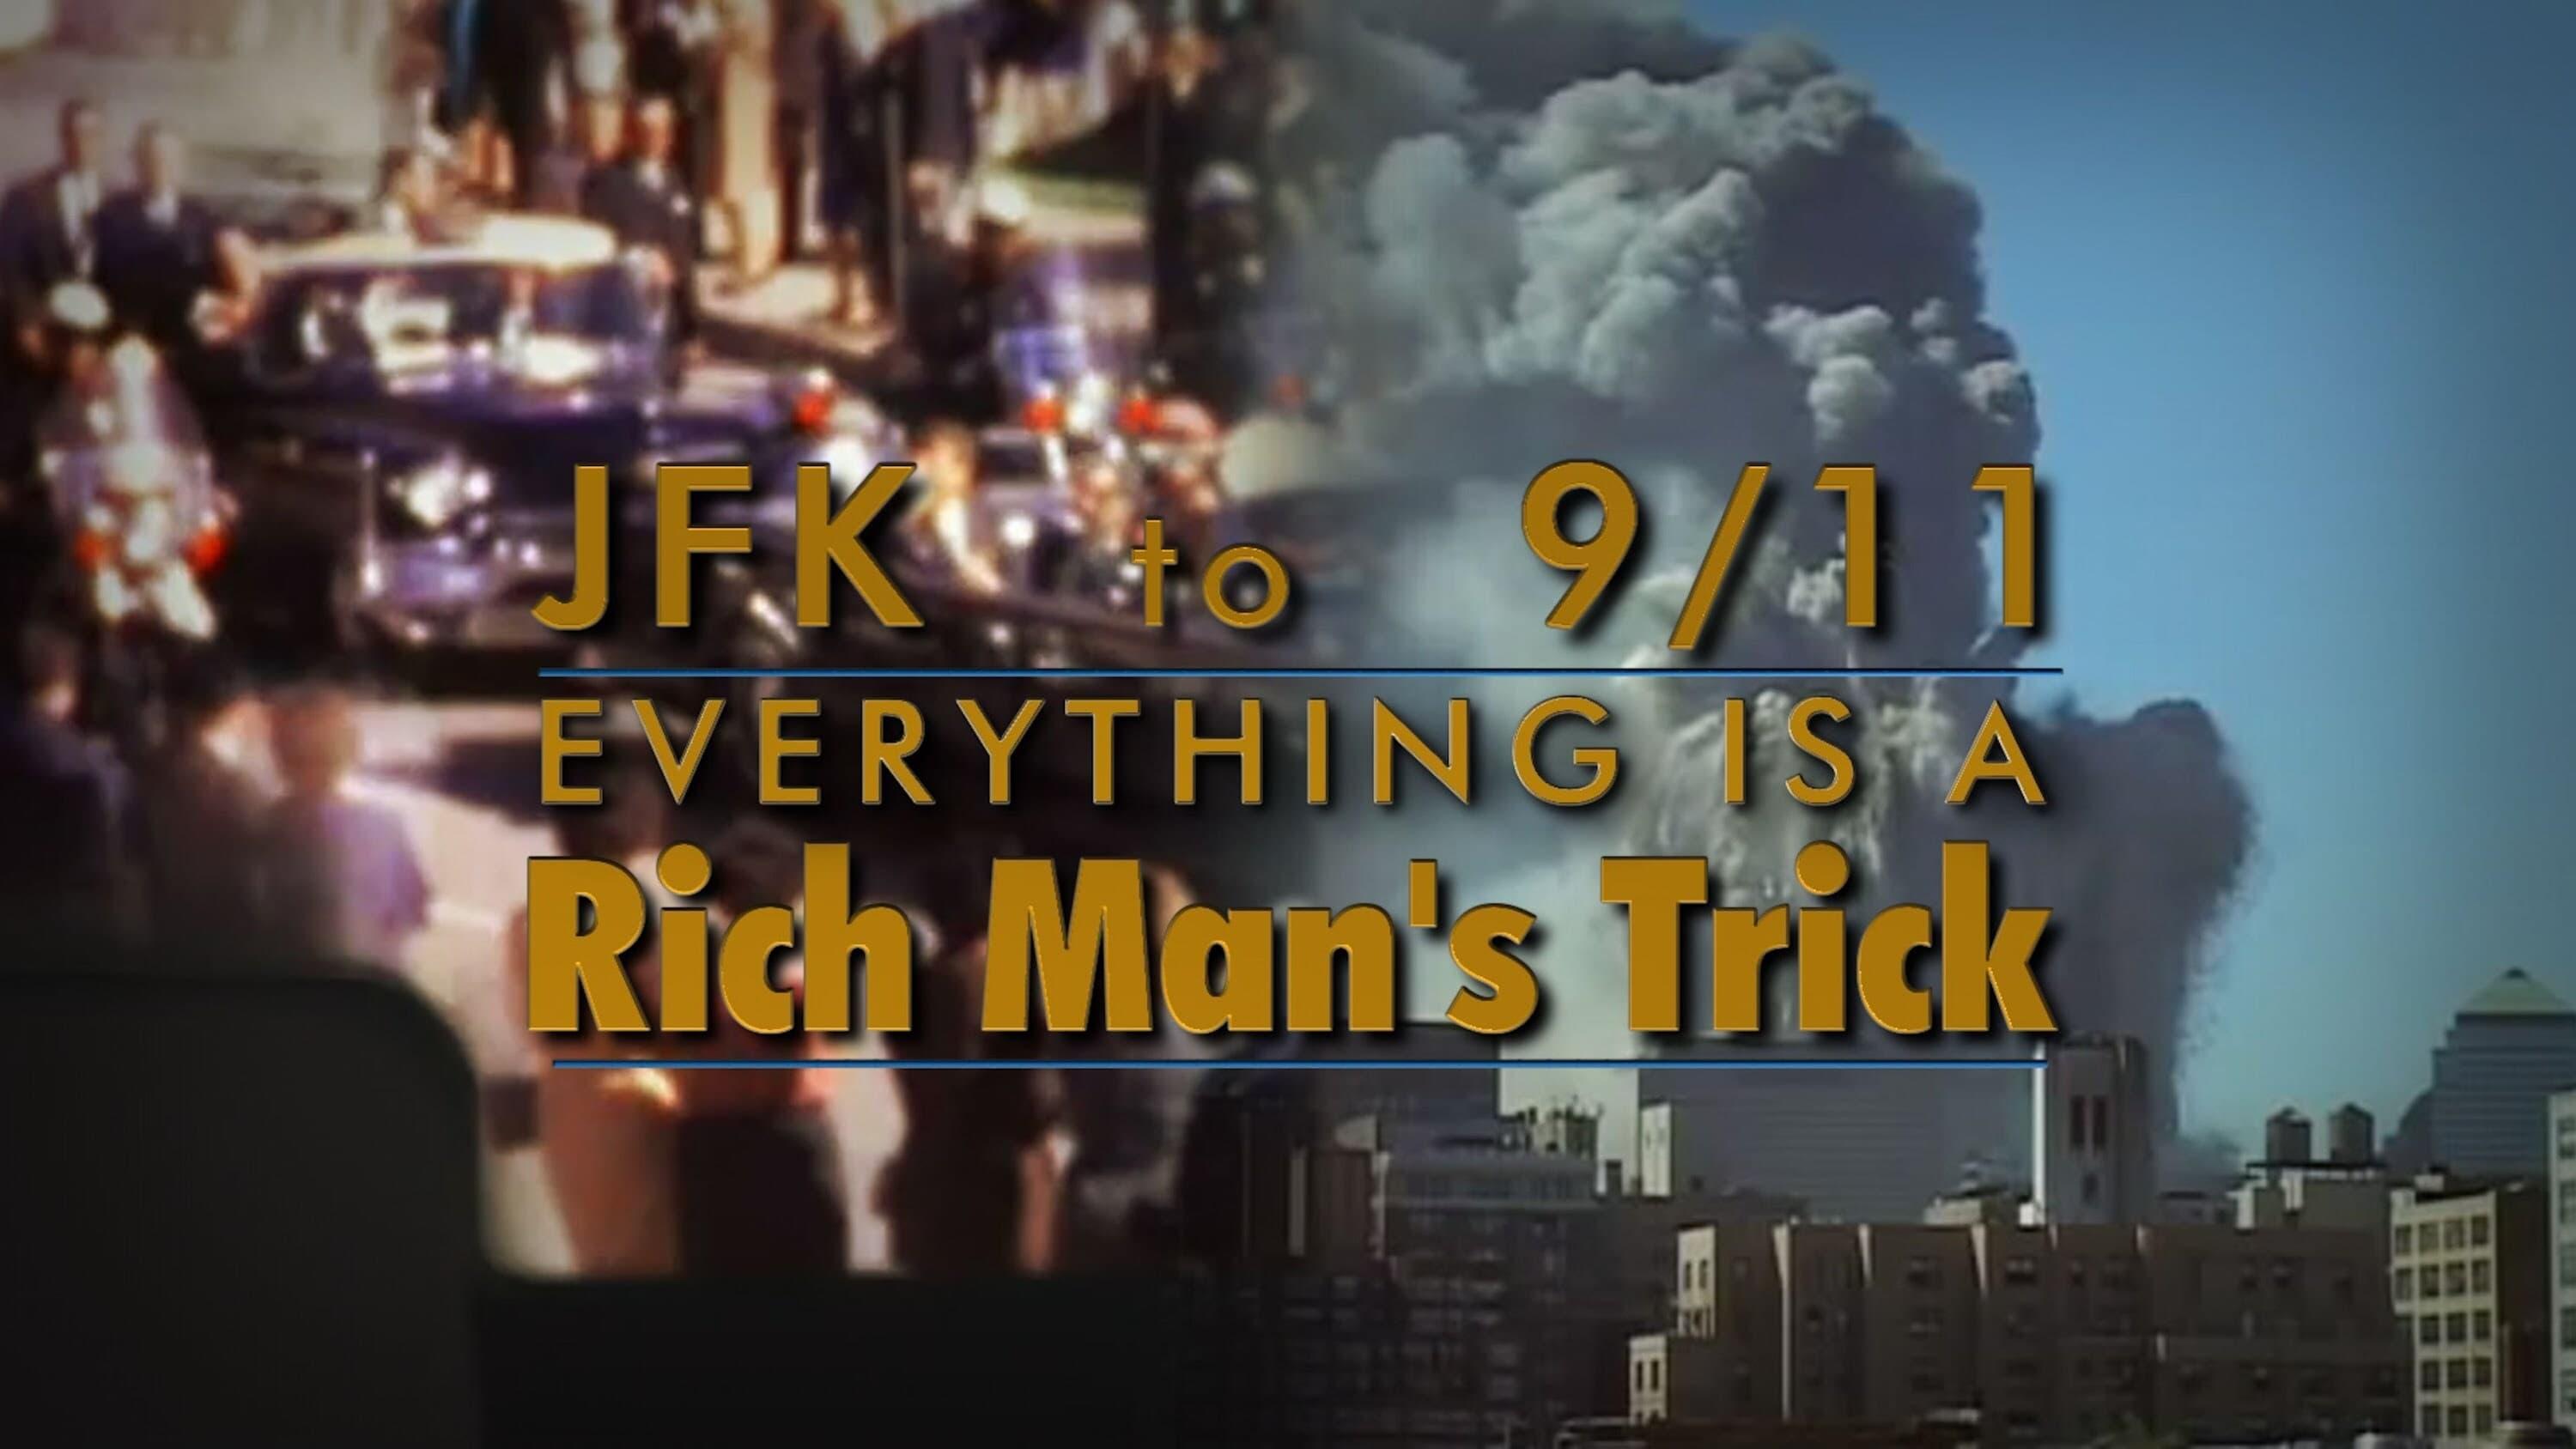 JFK to 9/11: Everything is a Rich Man's Trick backdrop